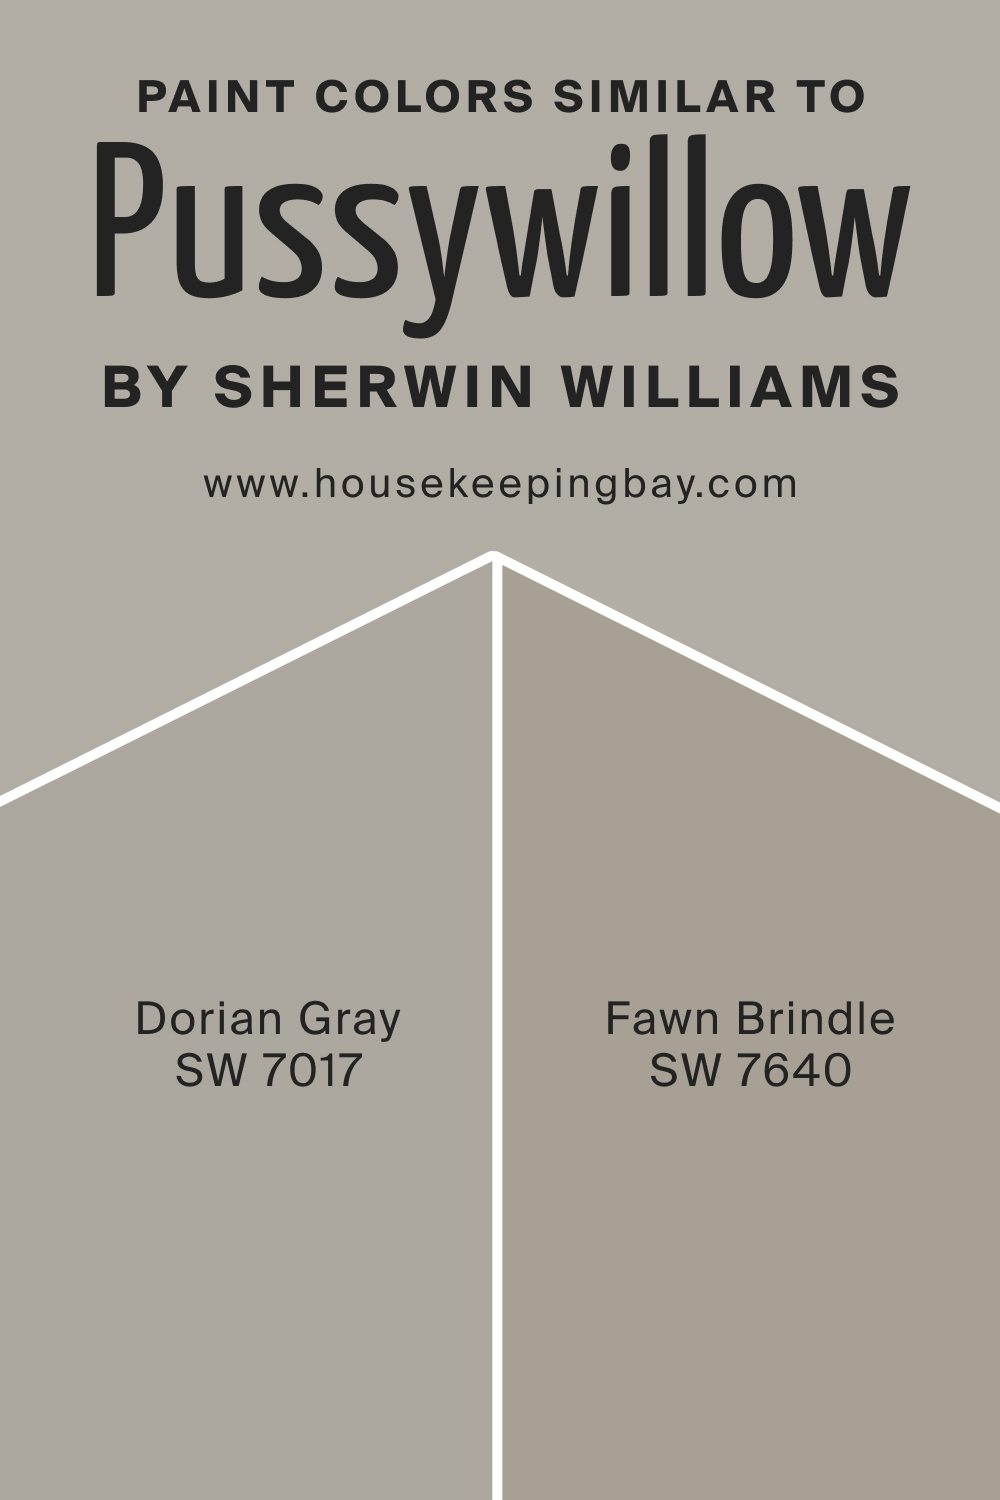 Paint Colors Similar to Pussywillow SW 7643 by Sherwin Williams